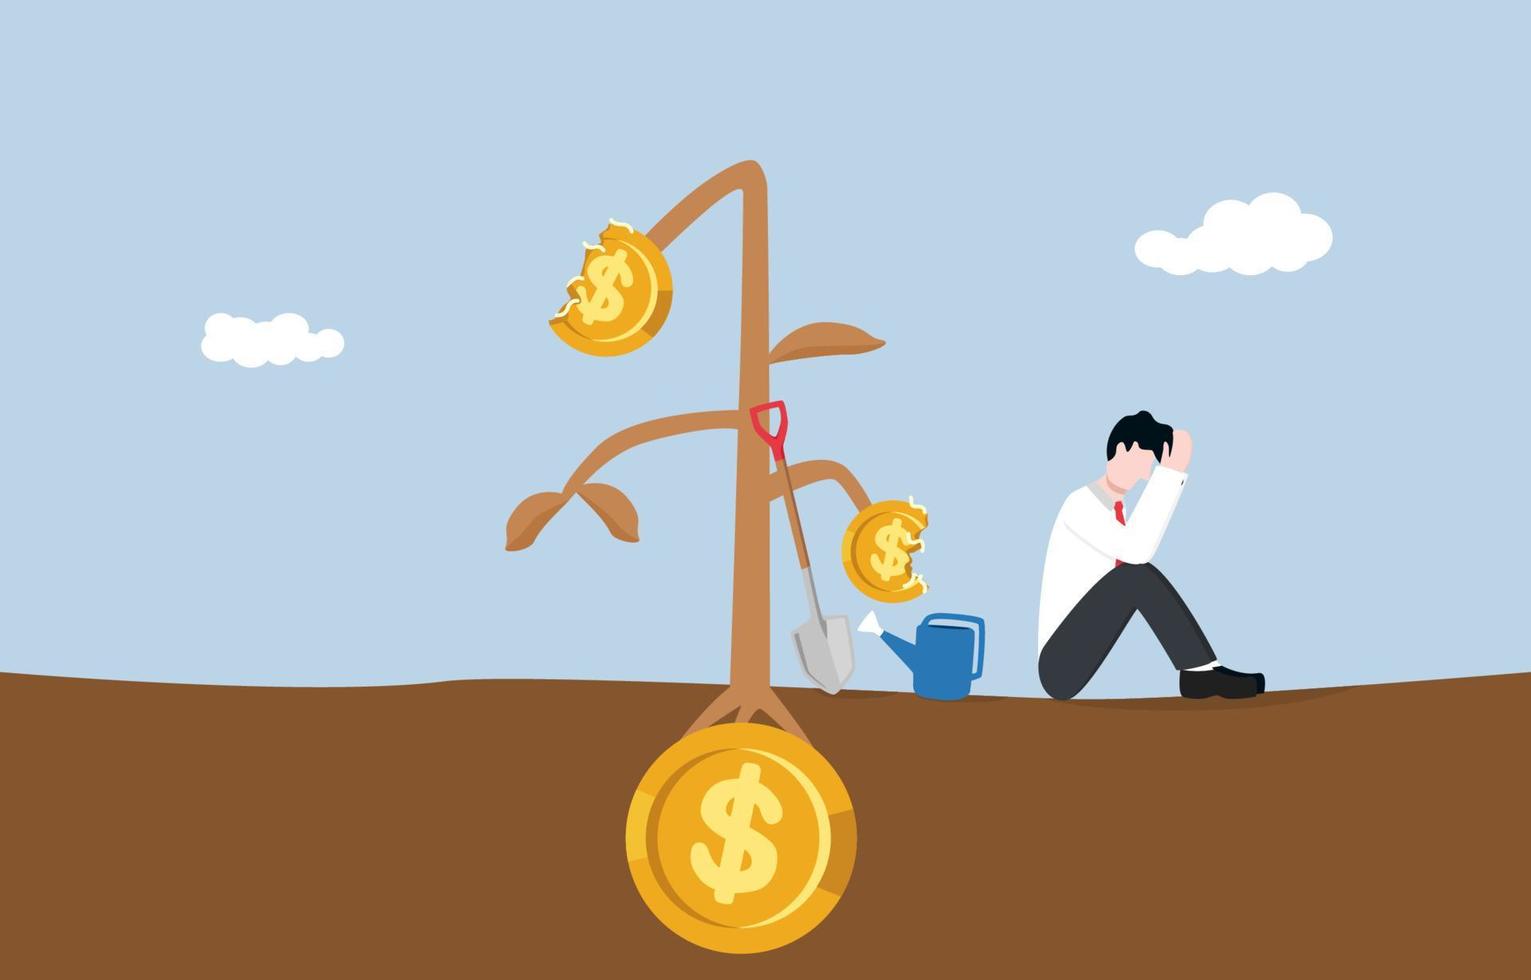 Lose money from business failure, mistake speculation in stock market, cryptocurrecy or other assets concept. Sad businessman sitting on ground for his dead and dying money plant. vector